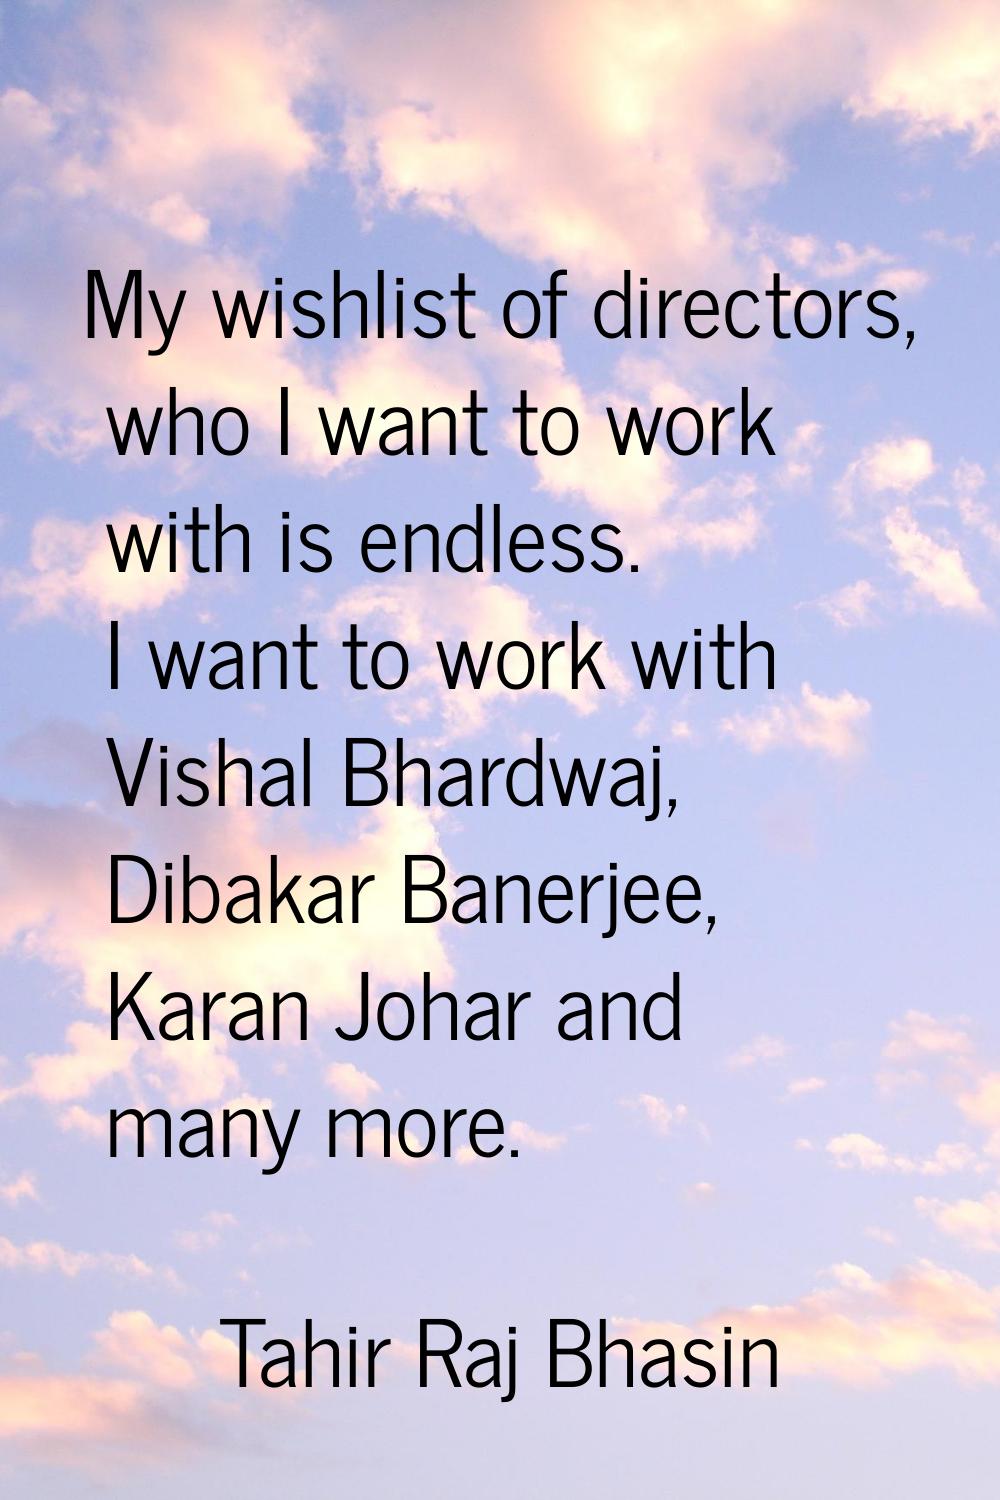 My wishlist of directors, who I want to work with is endless. I want to work with Vishal Bhardwaj, 